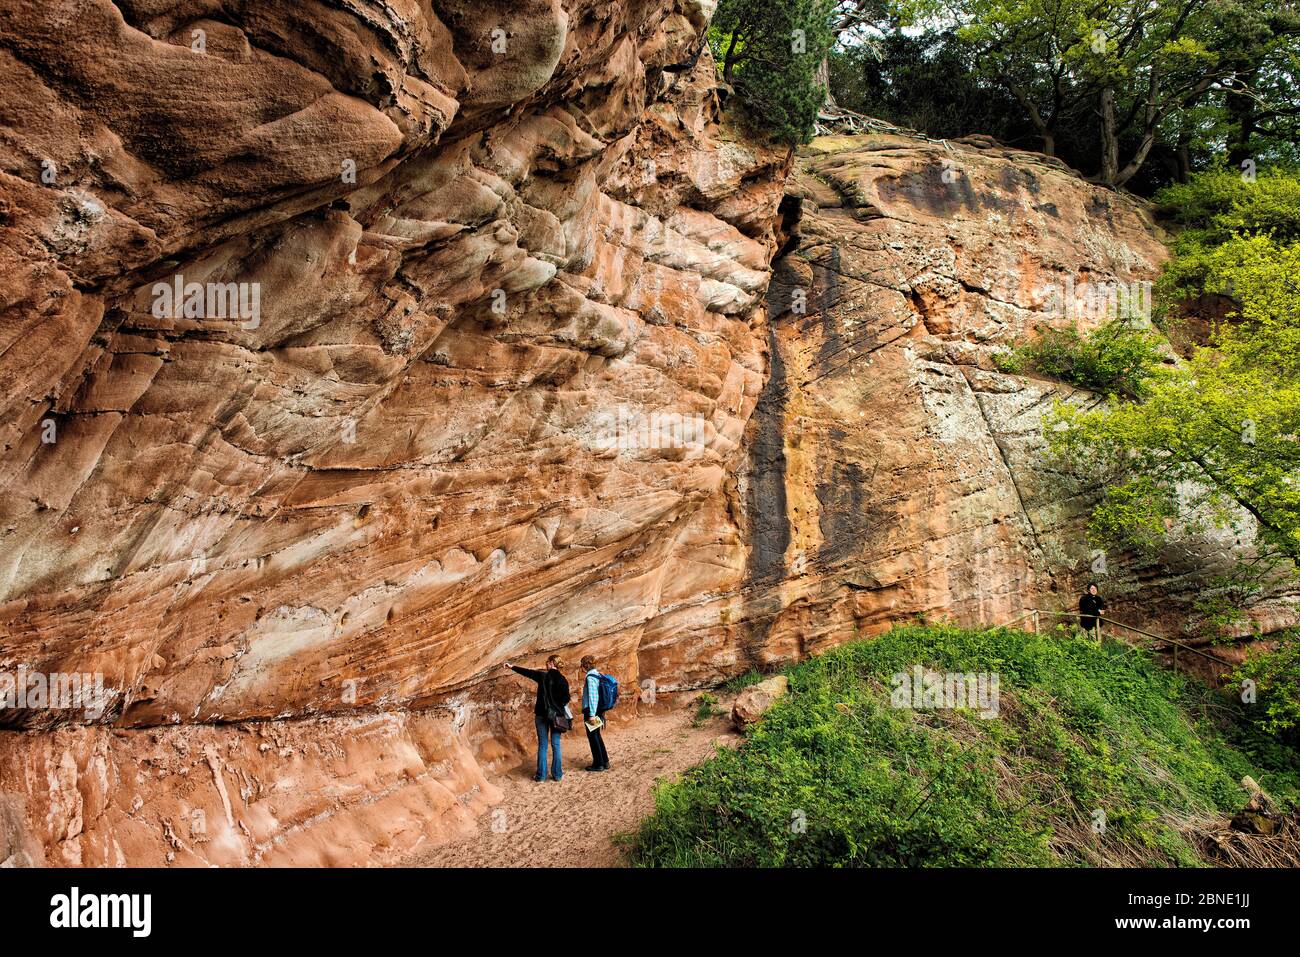 People looking at triassic New Red Sandstone cliffs of the Wilmslow Group, circa 250 million years old, Hawkstone Ridge, Hawkstone Follies, Shropshire Stock Photo